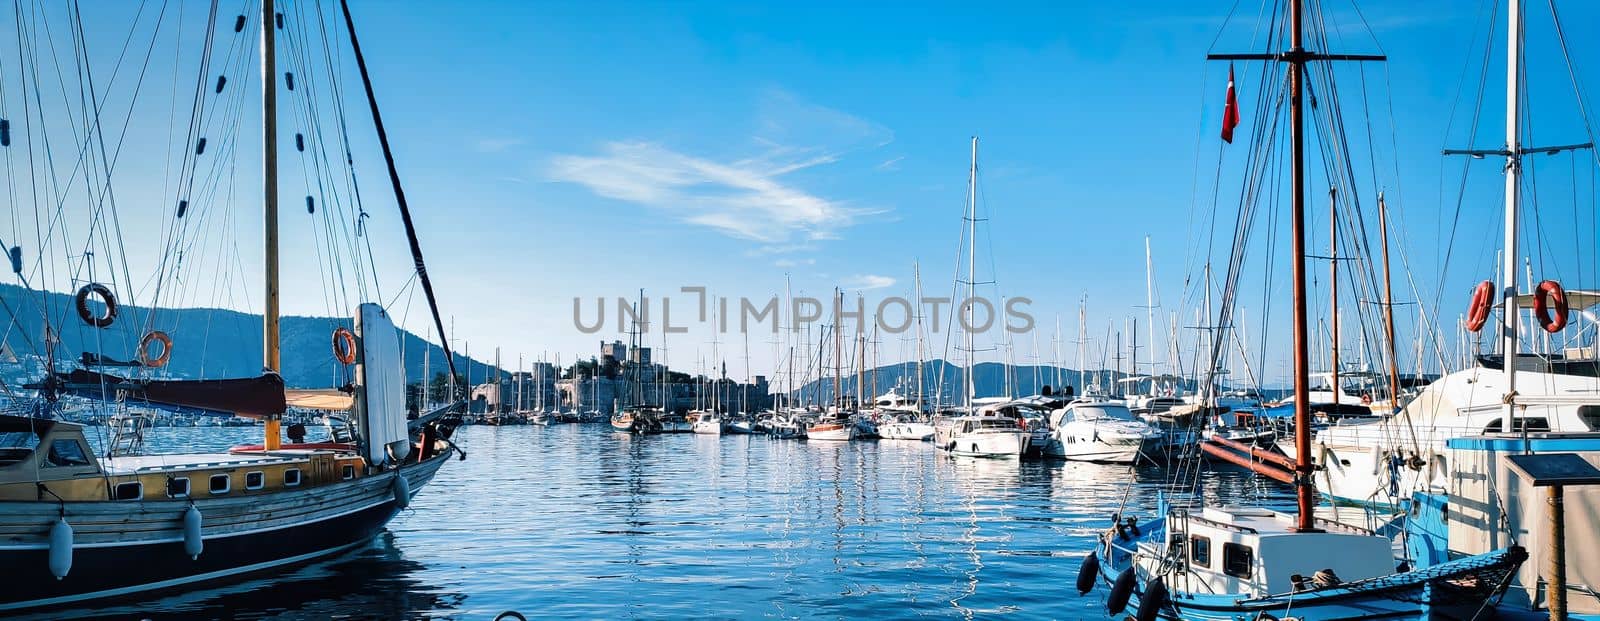 Picture of row of sailboats reflected in water, yacht port on the bay, water transport, ocean transportation, beautiful vessel in the harbor, summer vacation, active lifestyle, holiday concept. download image